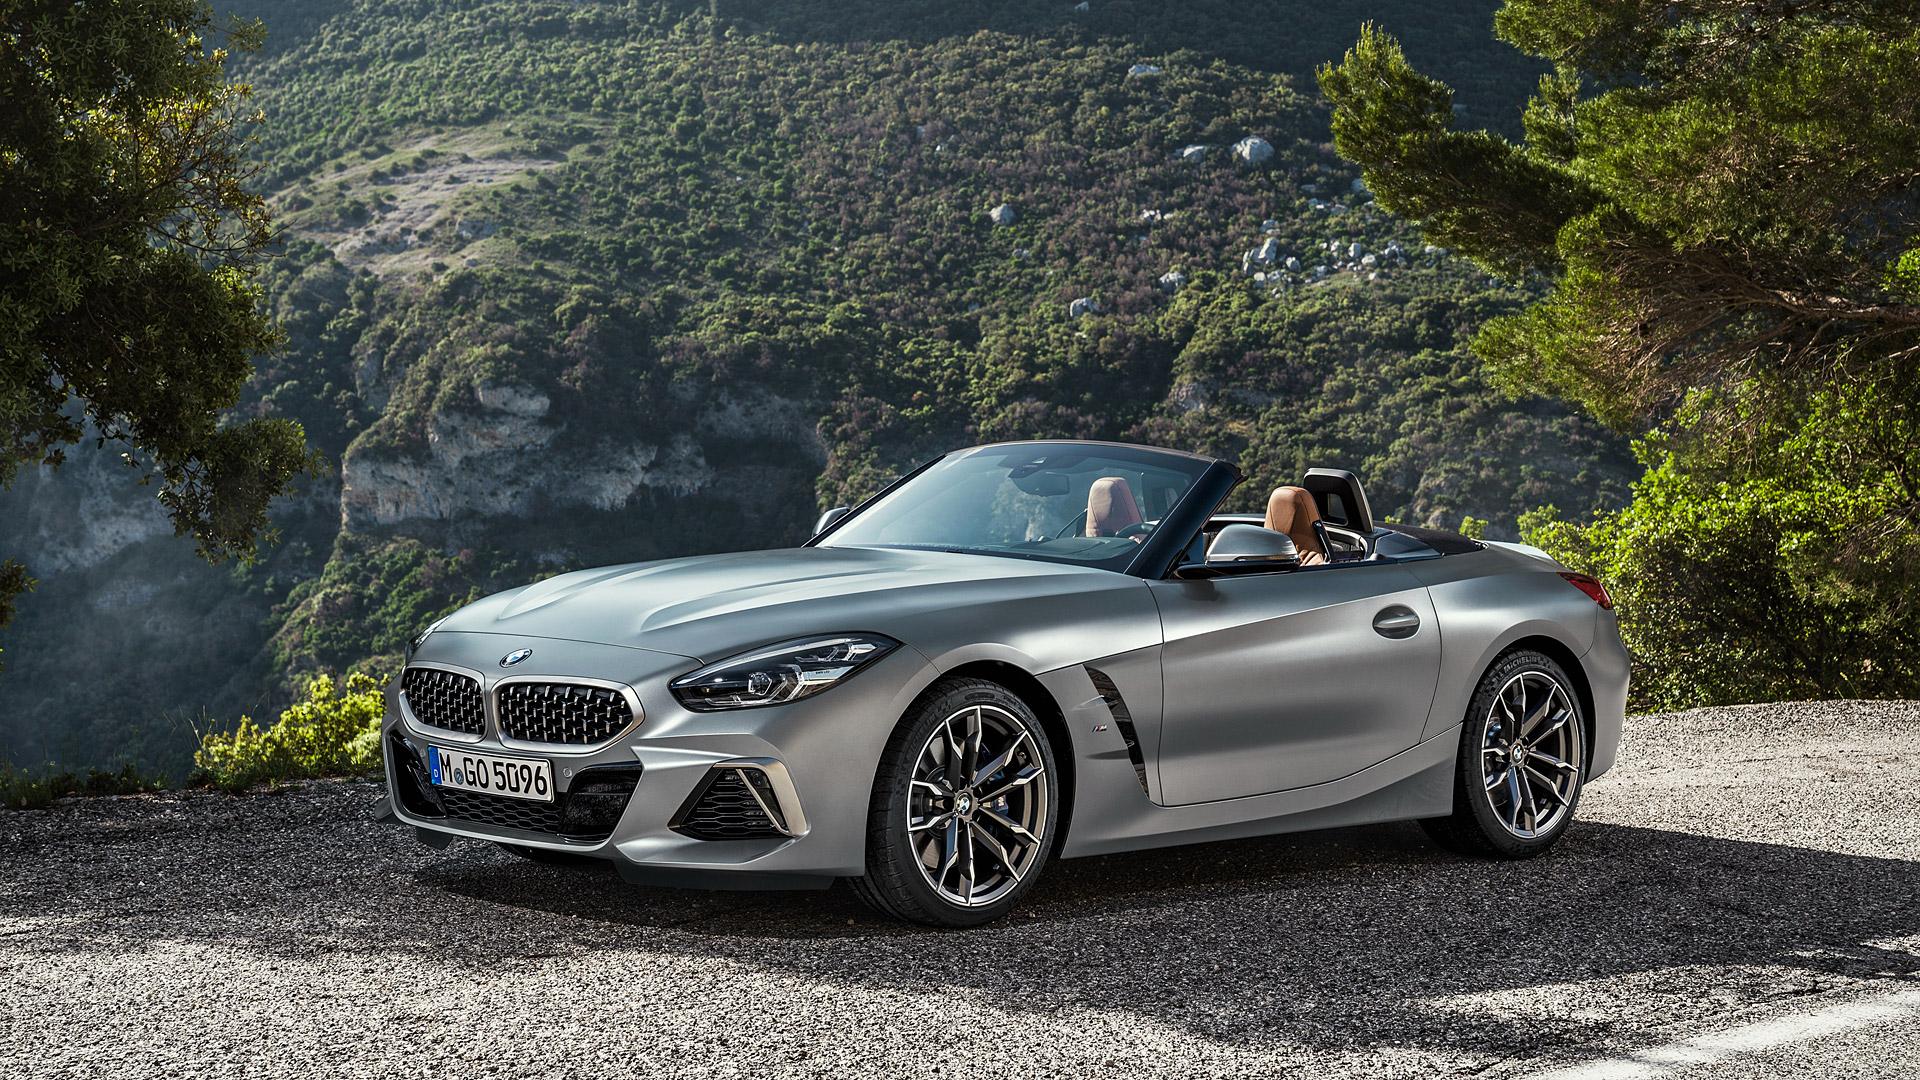 Bmw Roadster Wallpapers